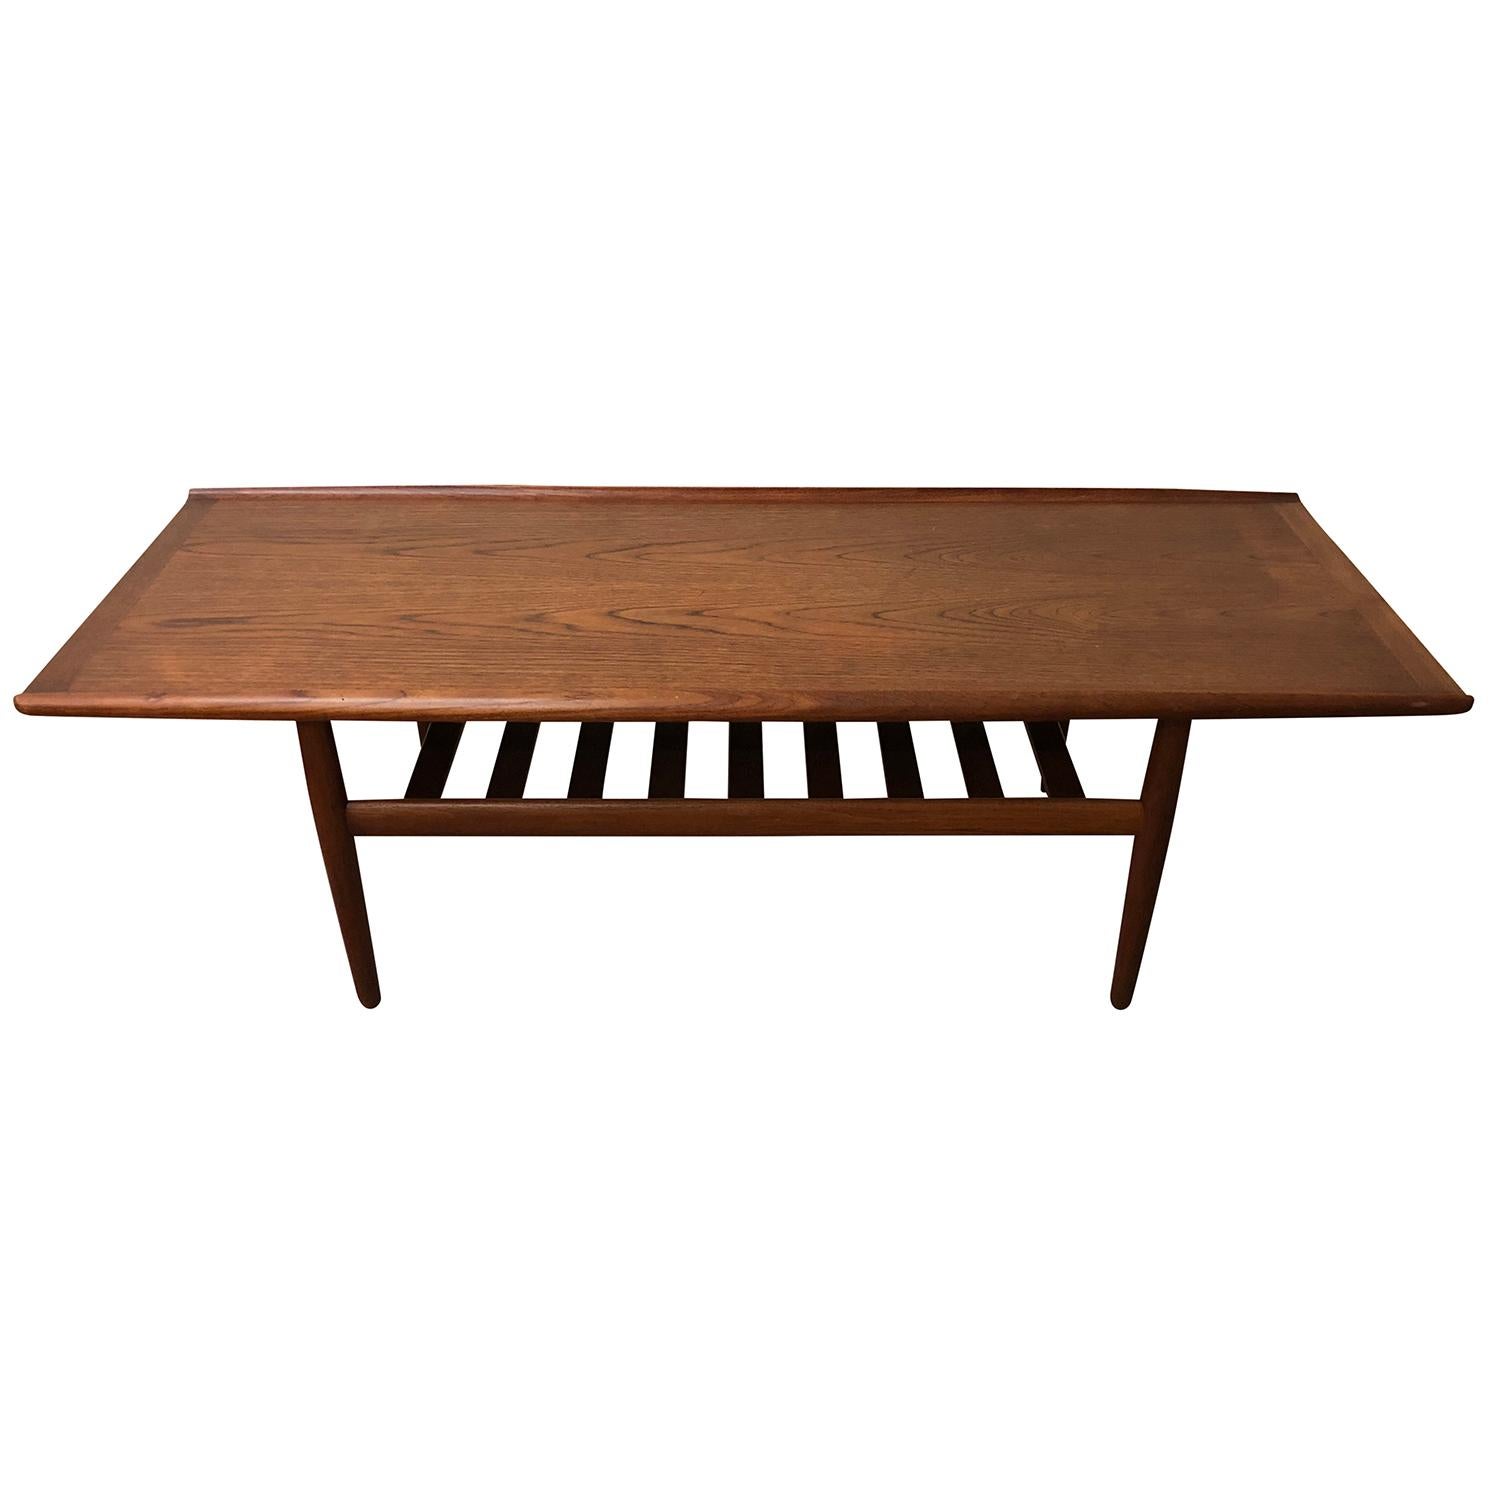 andreas table